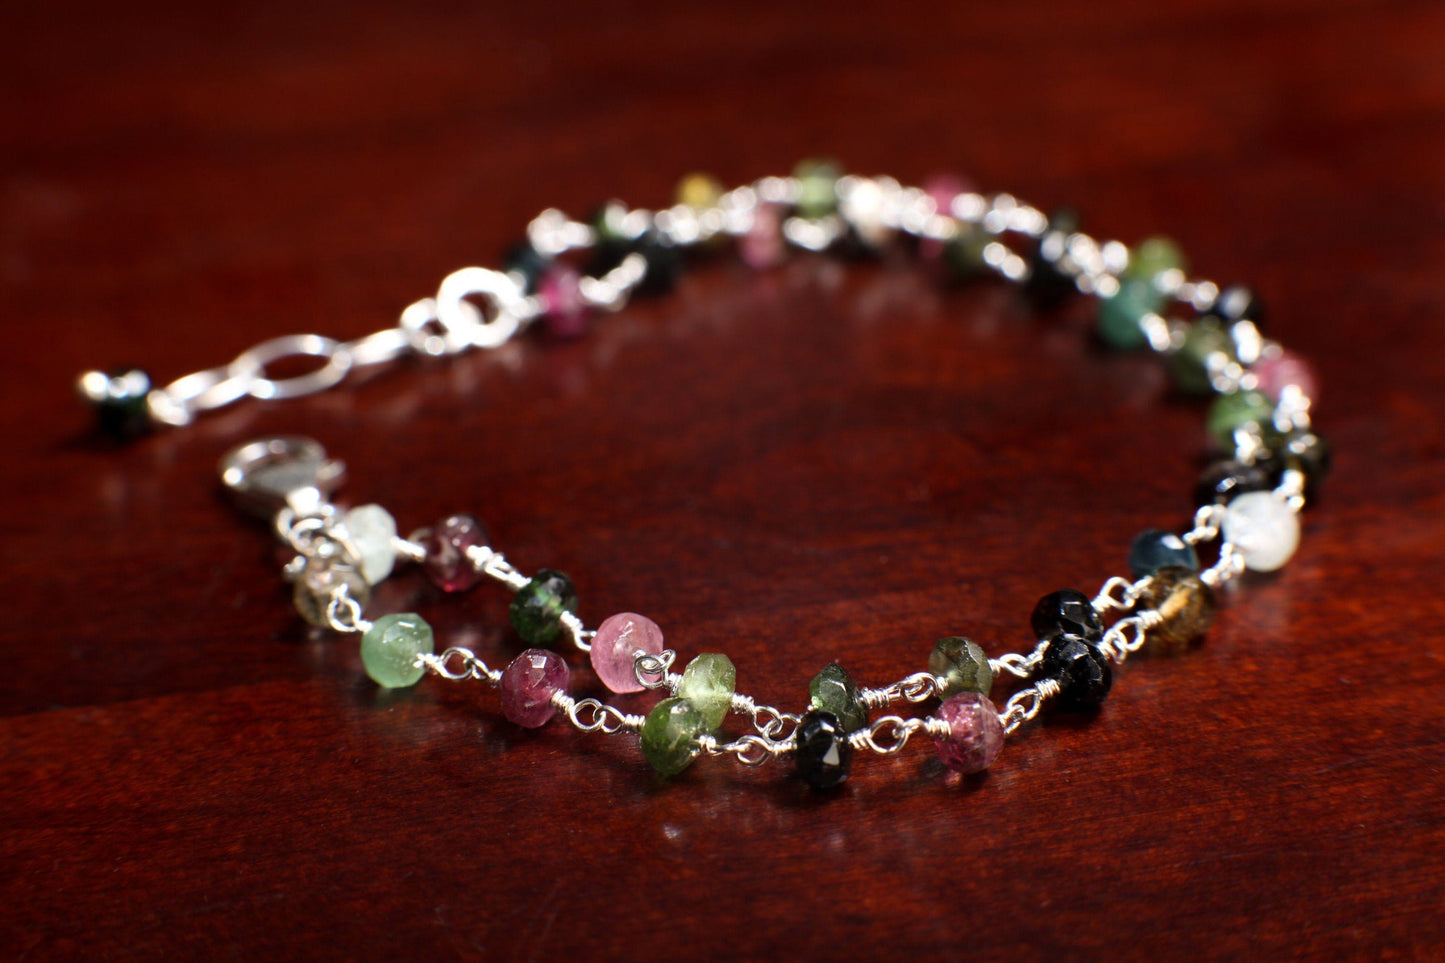 Watermelon Tourmaline Silver Wire Wrapped Faceted large 5mm Rondelle 2 Line Bracelet in 925 Sterling Silver Clasp and extension,Gift for her